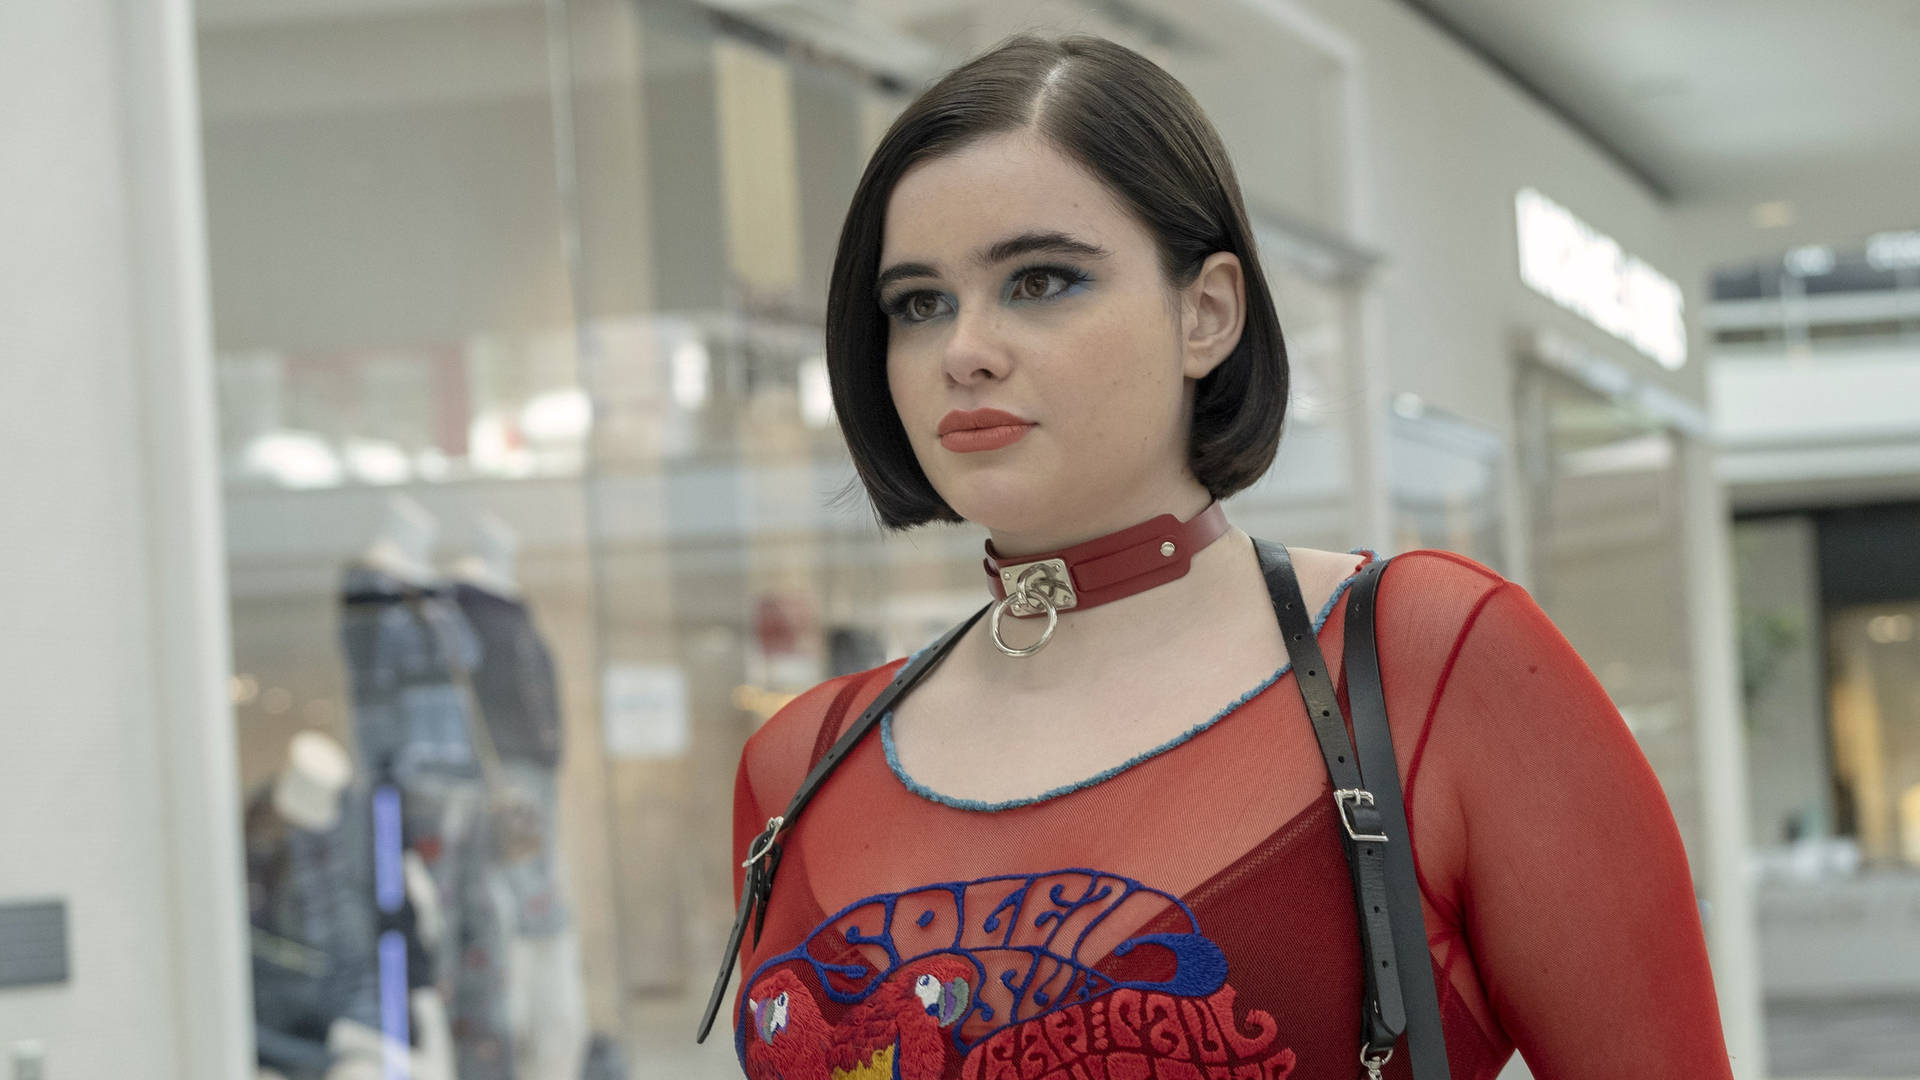 Empowered and Confident - Fat Girl Barbie Ferreira Wallpaper